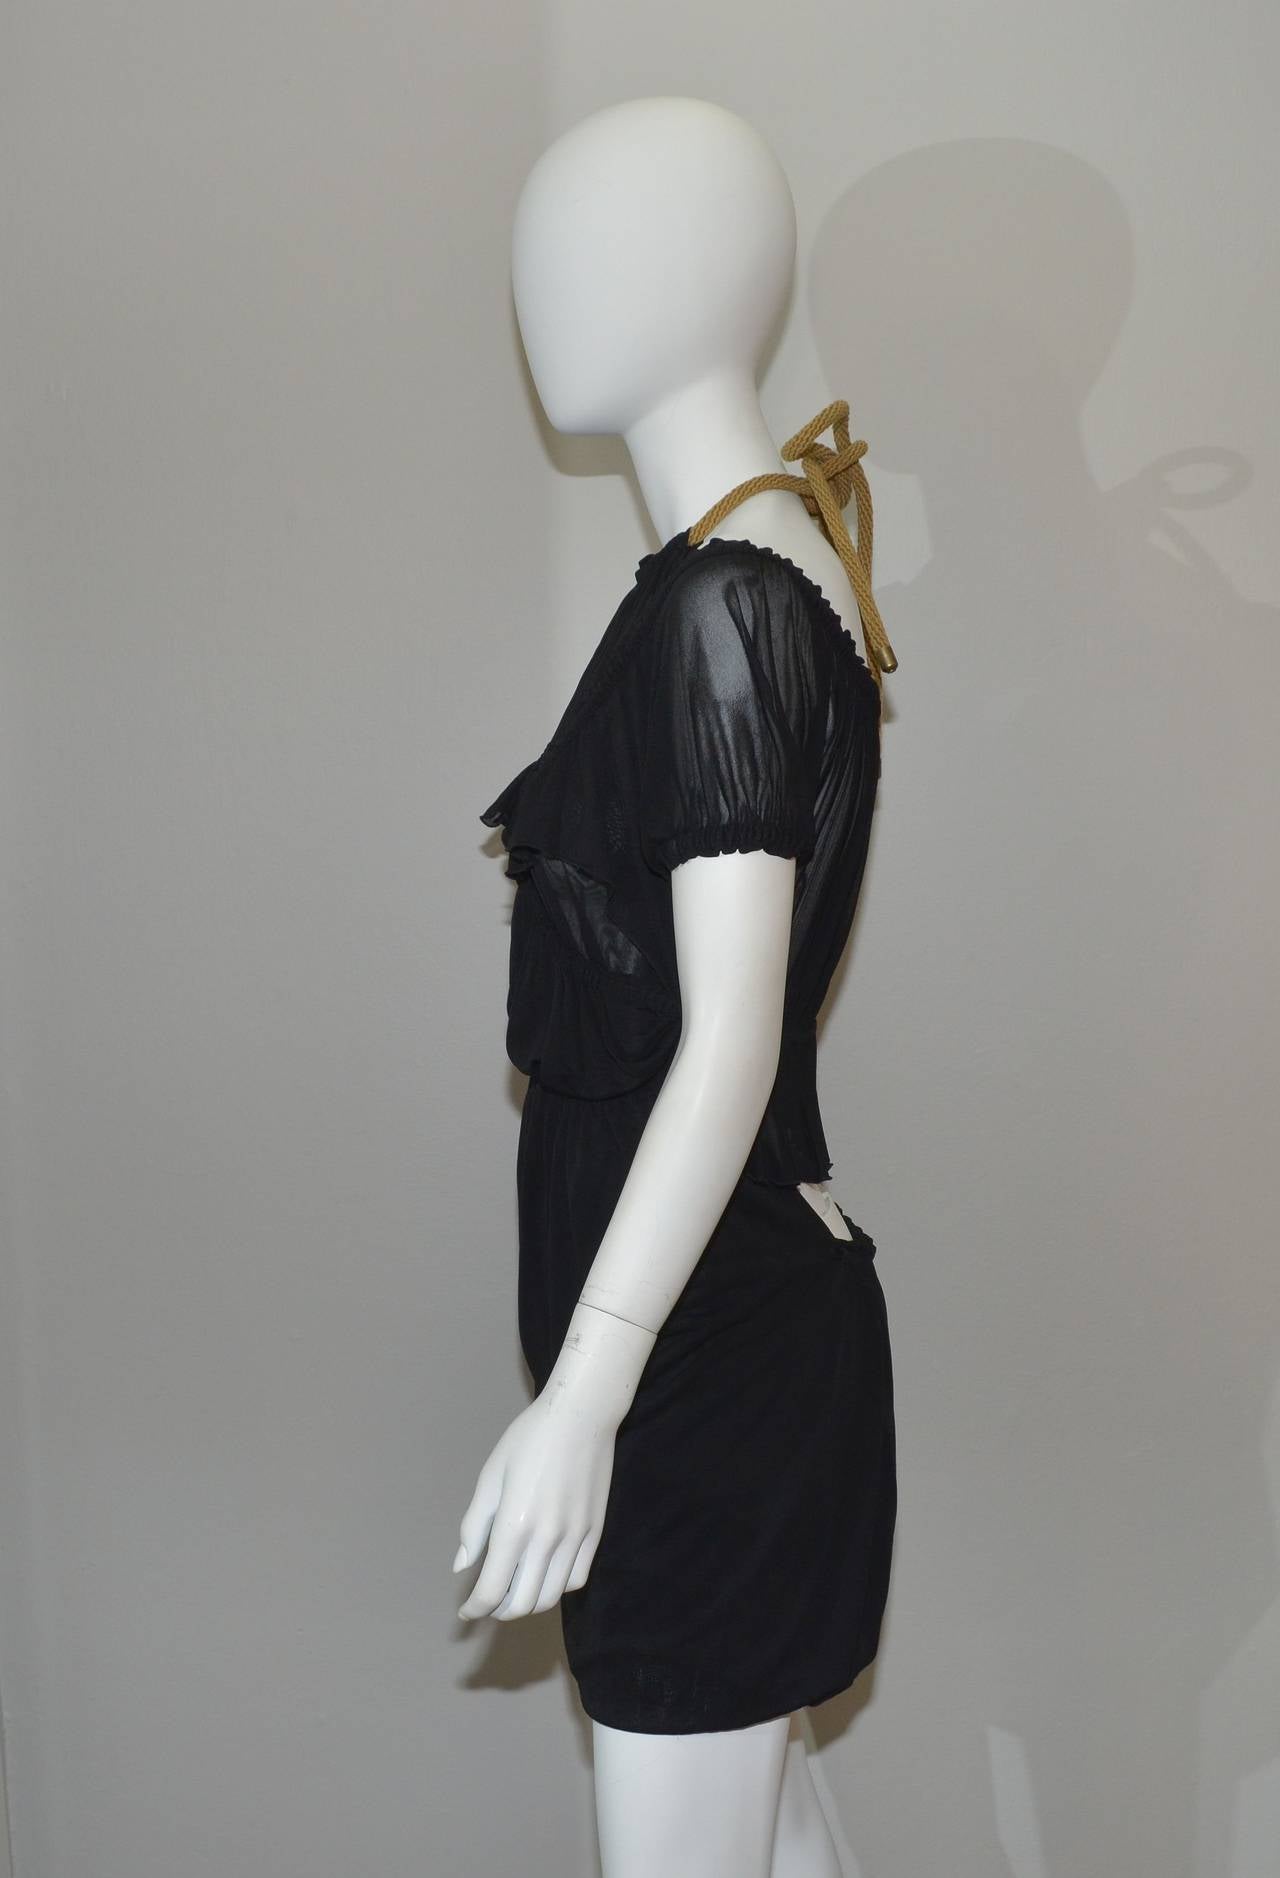 Yves Saint Laurent Dress. Uniquely layered rayon jersey dress has a halter neck with a thick rope closure, partially open back, and ruffled trims. Dress is one long piece of fabric in the front and the halter portion of the dress folds under the